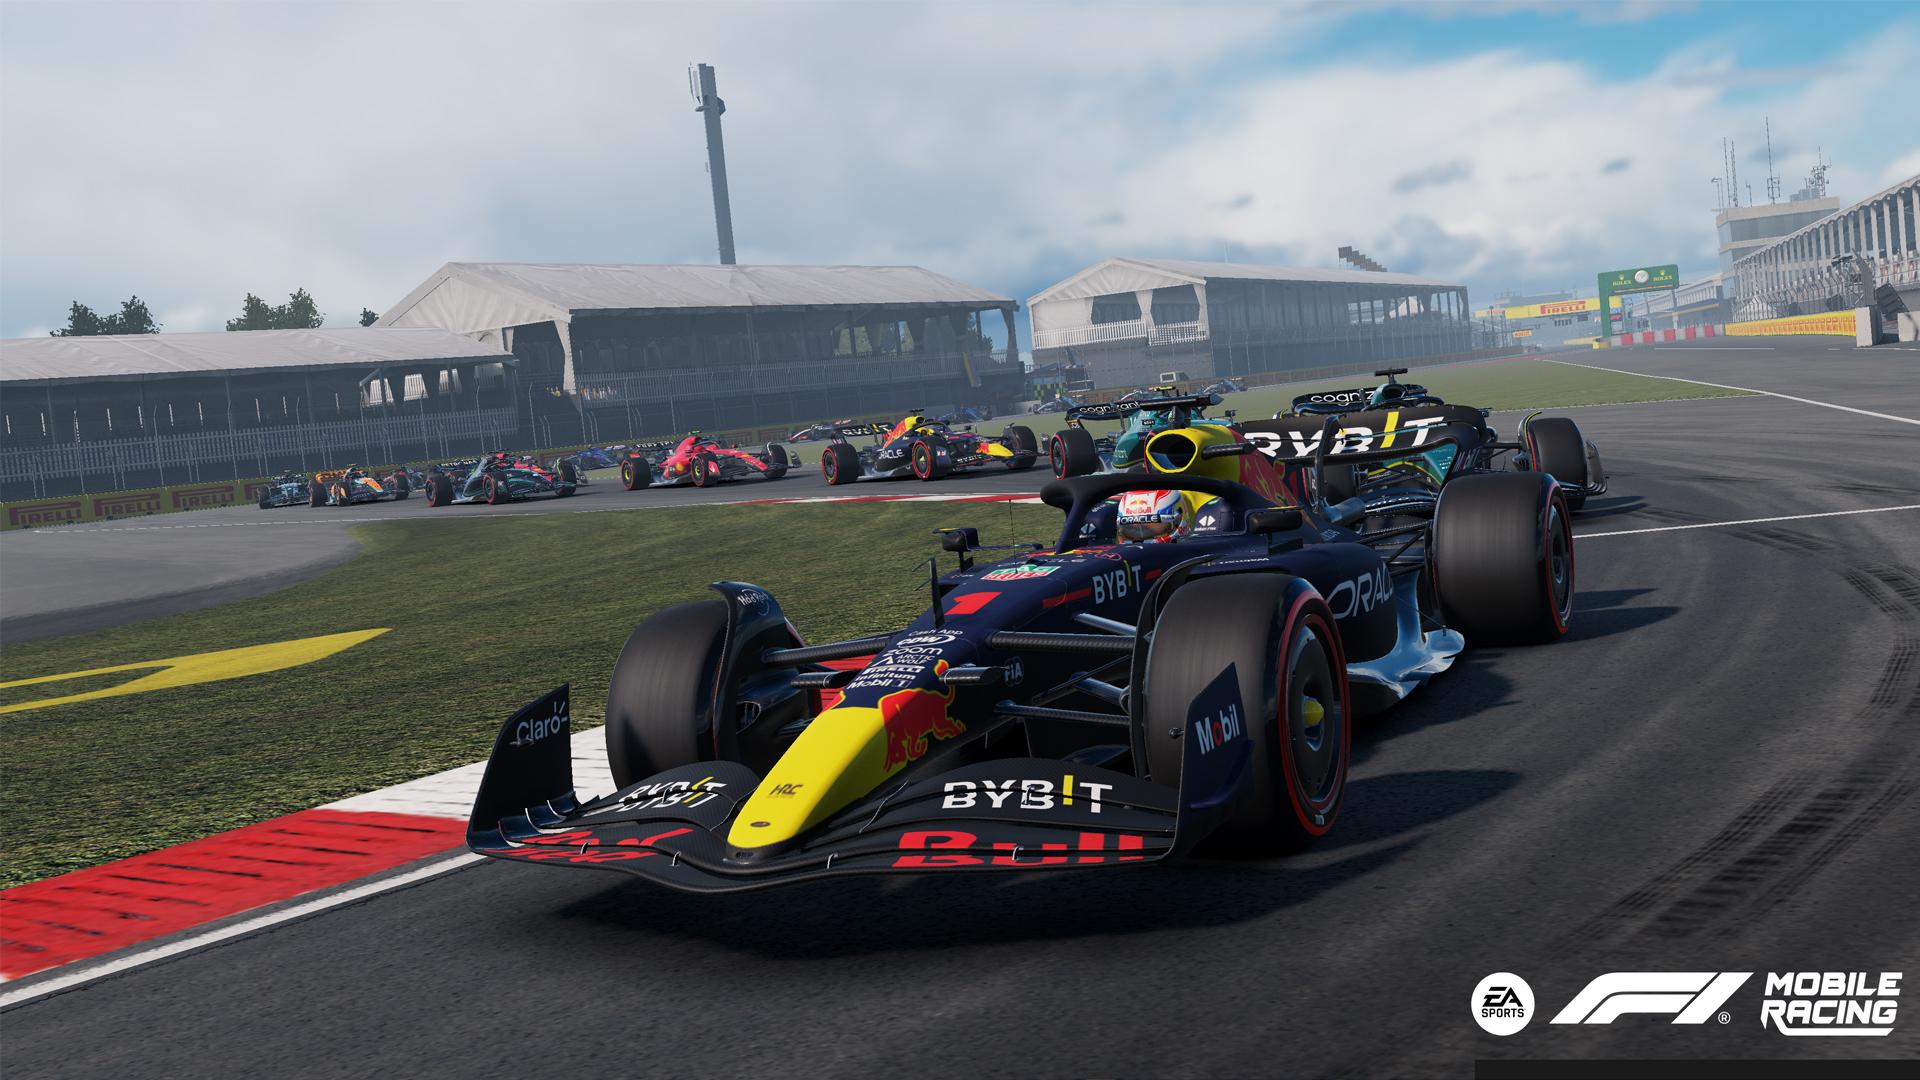 Play Formula Car Racing: Car Games Online for Free on PC & Mobile